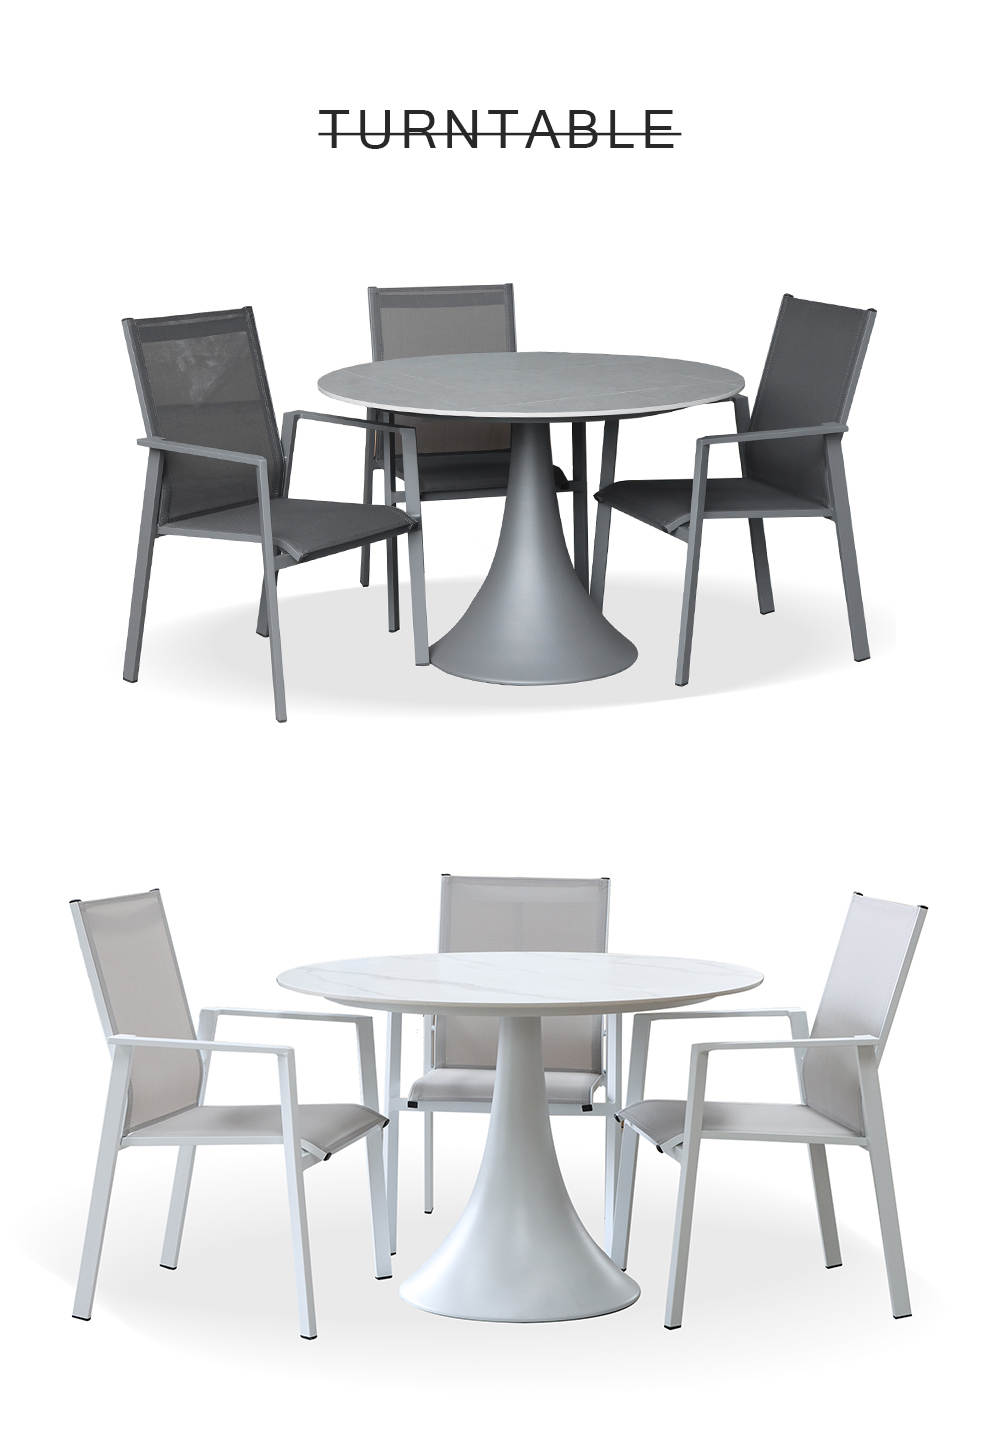 outdoor dining furniture